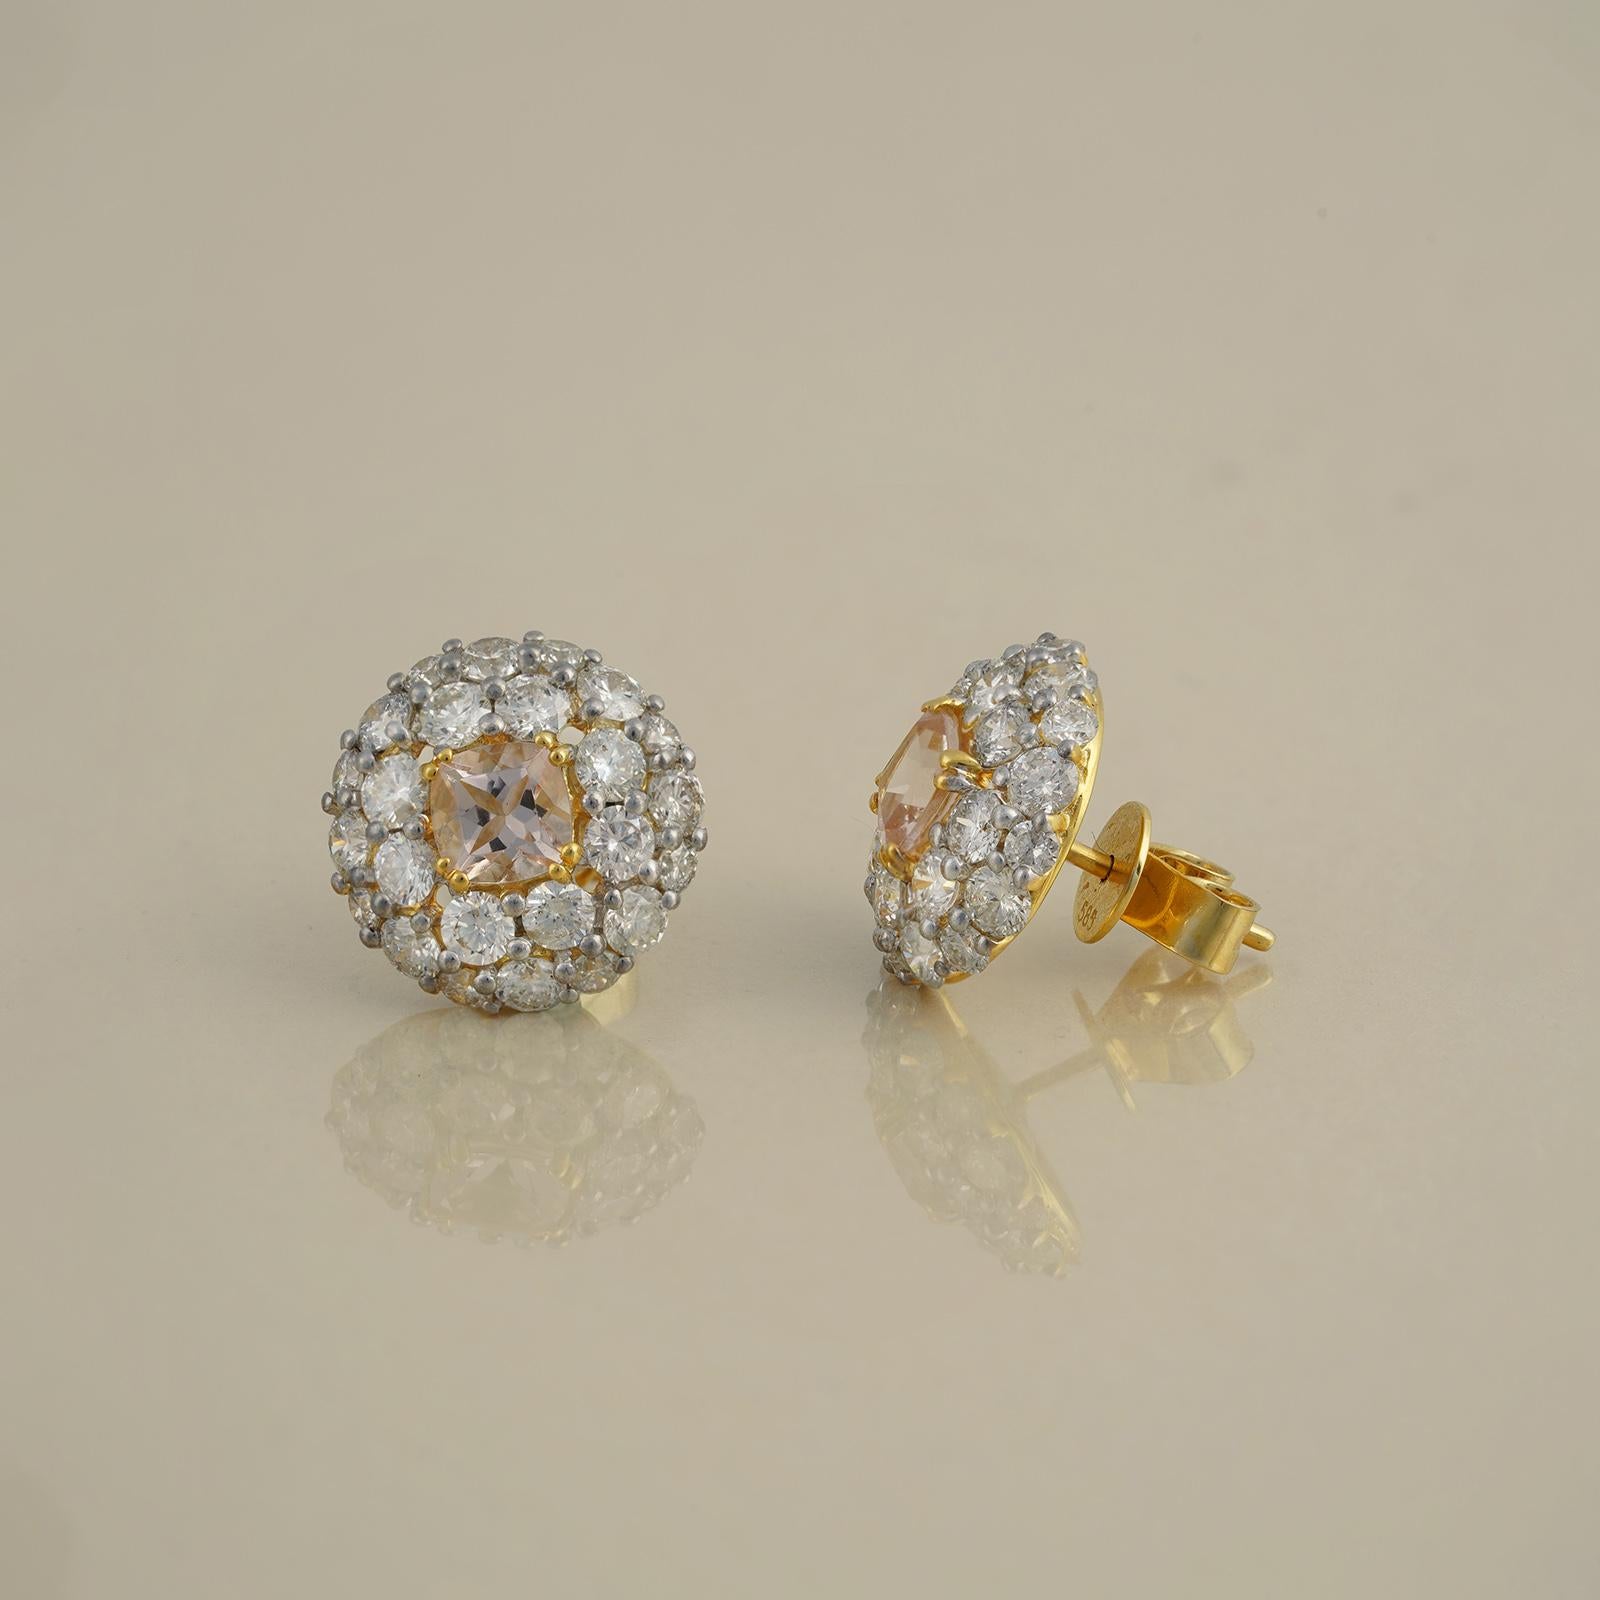 Moi Megan Gold Diamond and Morganite Ear Studs In New Condition For Sale In Lawrenceville, GA